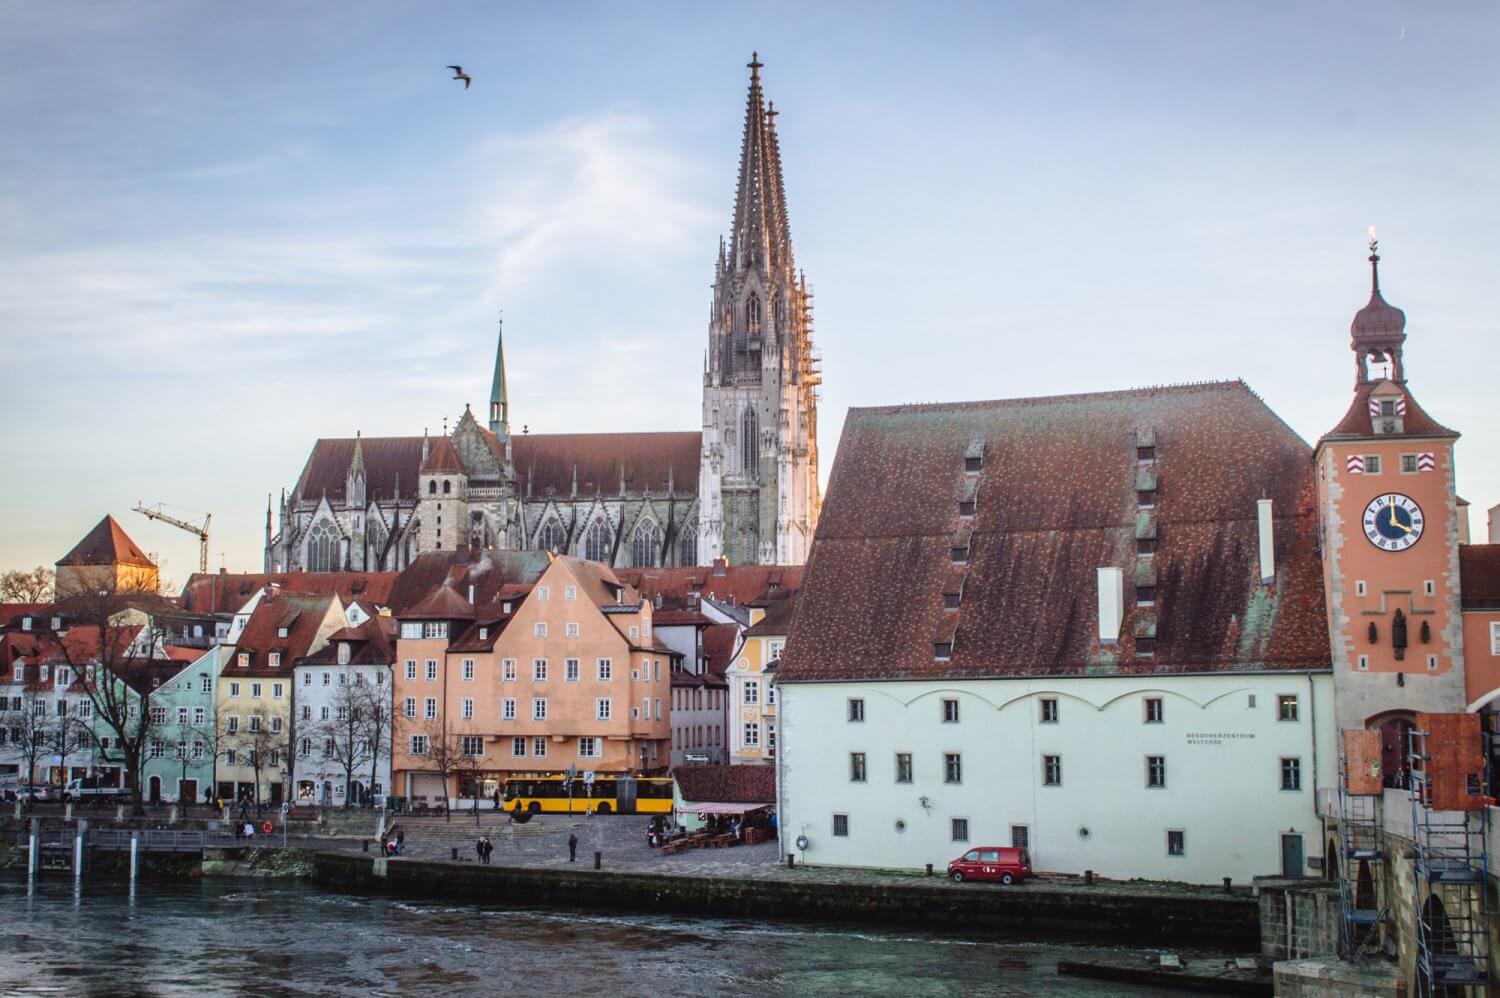 A view of beautiful Regensburg, Germany by the river